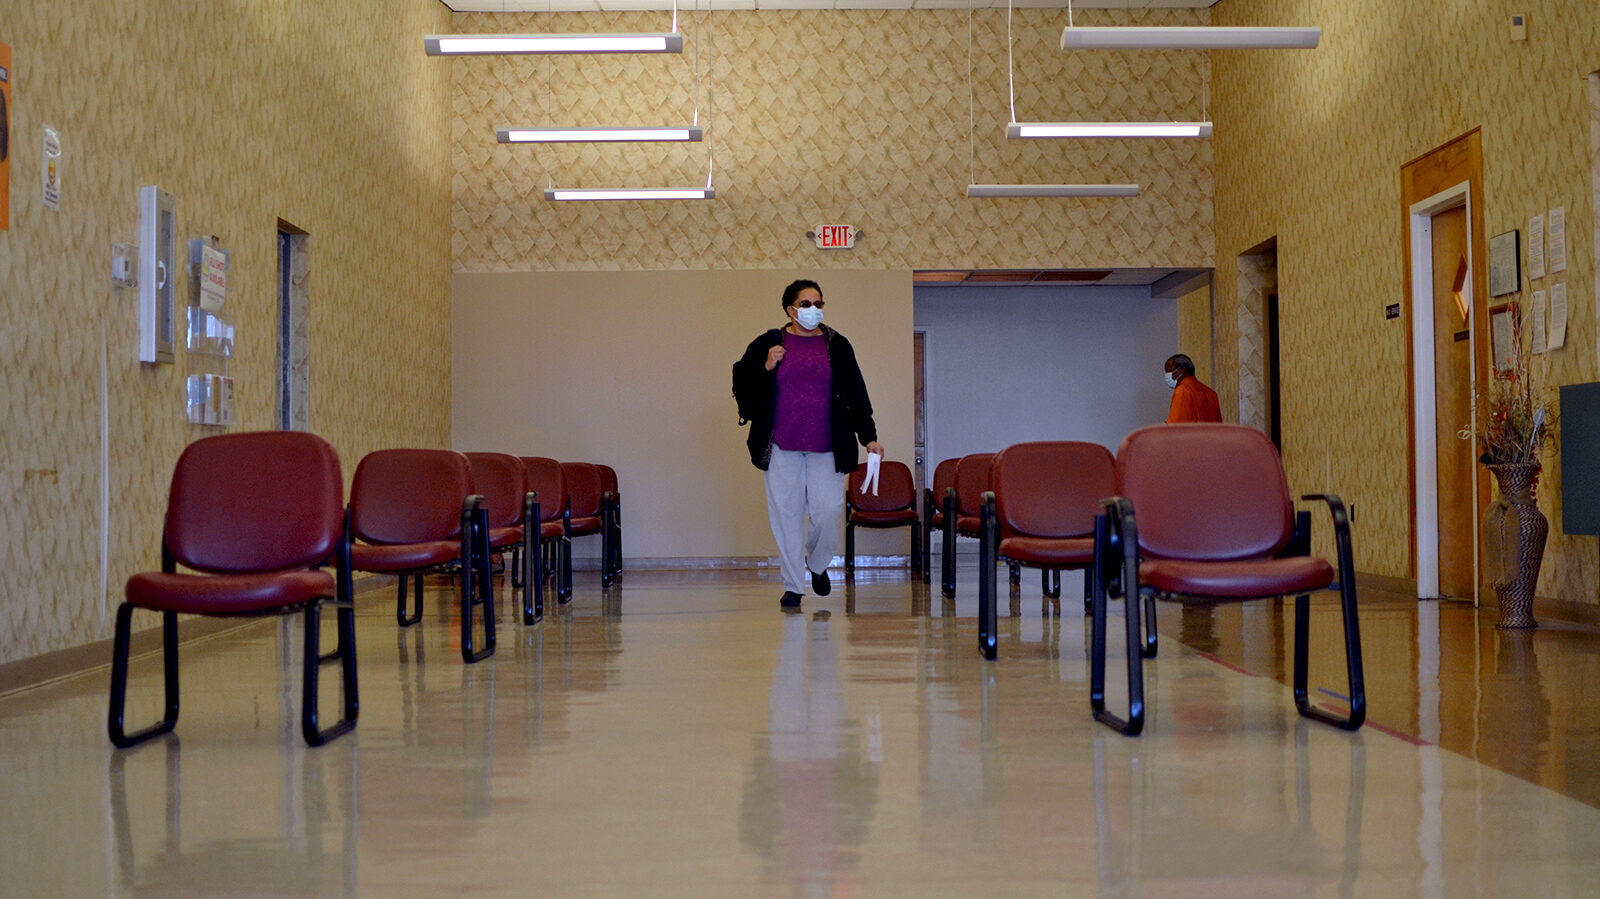 A woman walks through the dental clinic at The Delta Health Center in Mound Bayou, Mississippi.